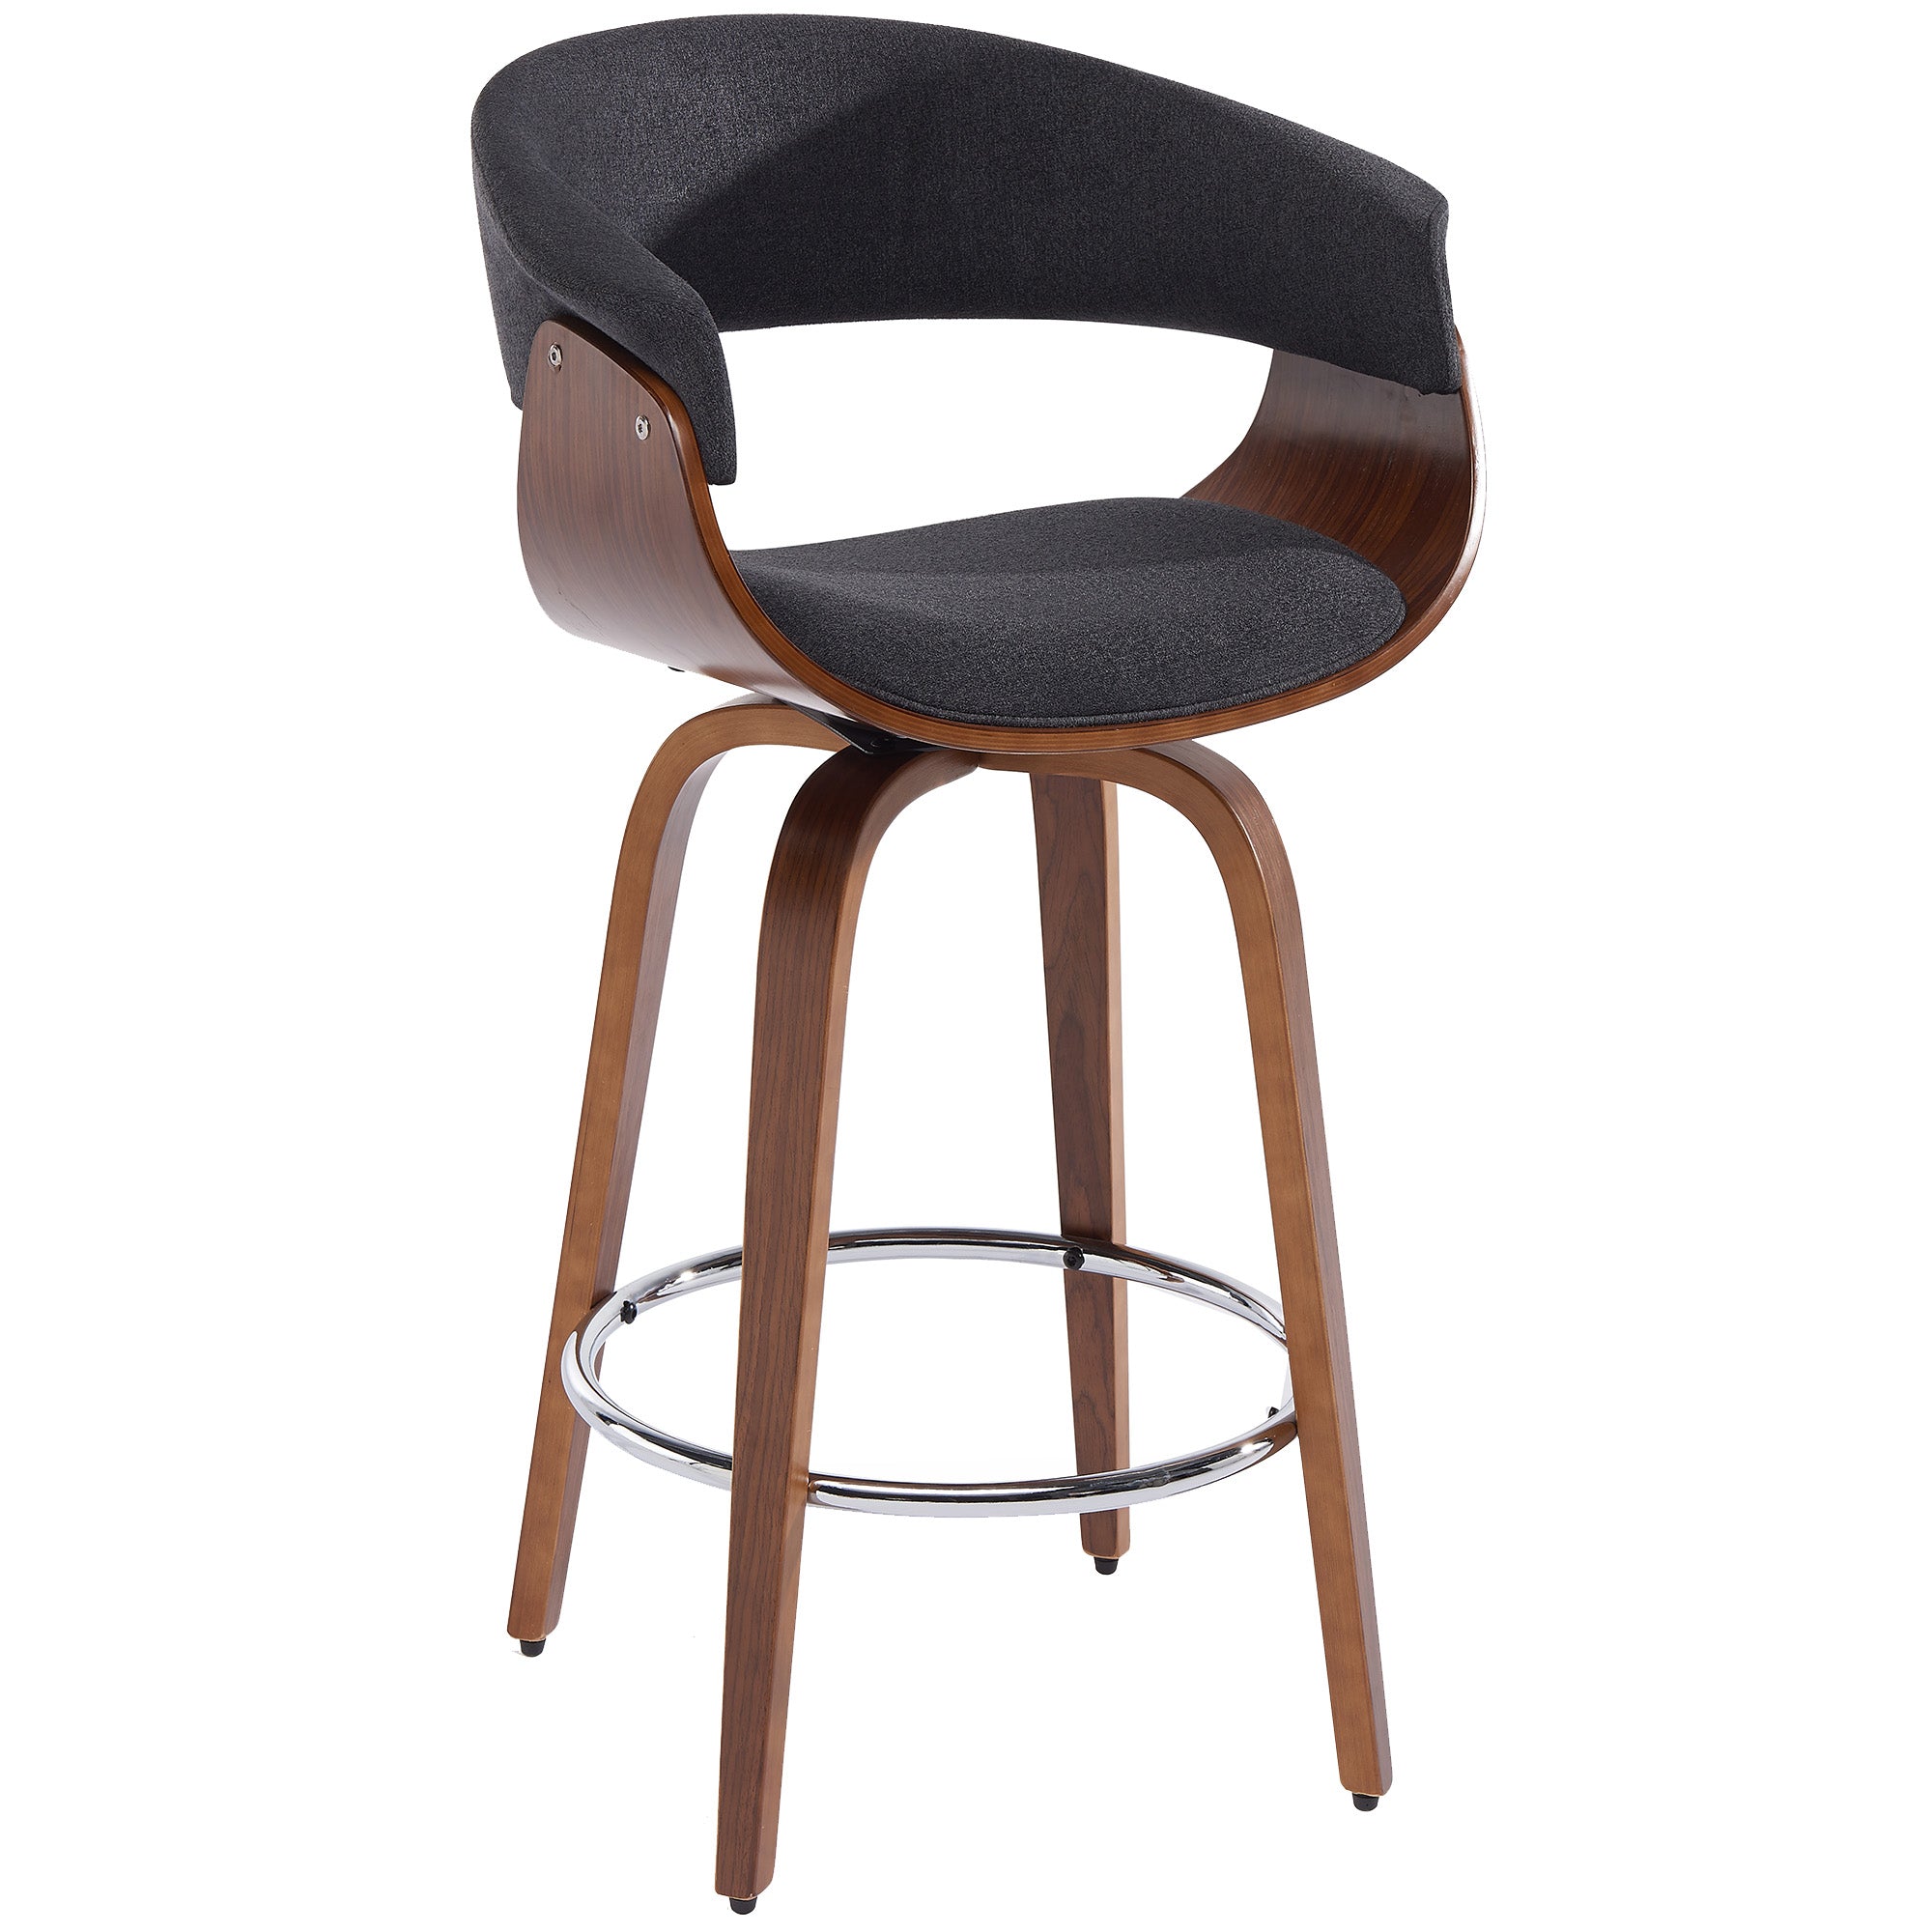 HOLT-26" COUNTER STOOL-FABRIC CHARCOAL